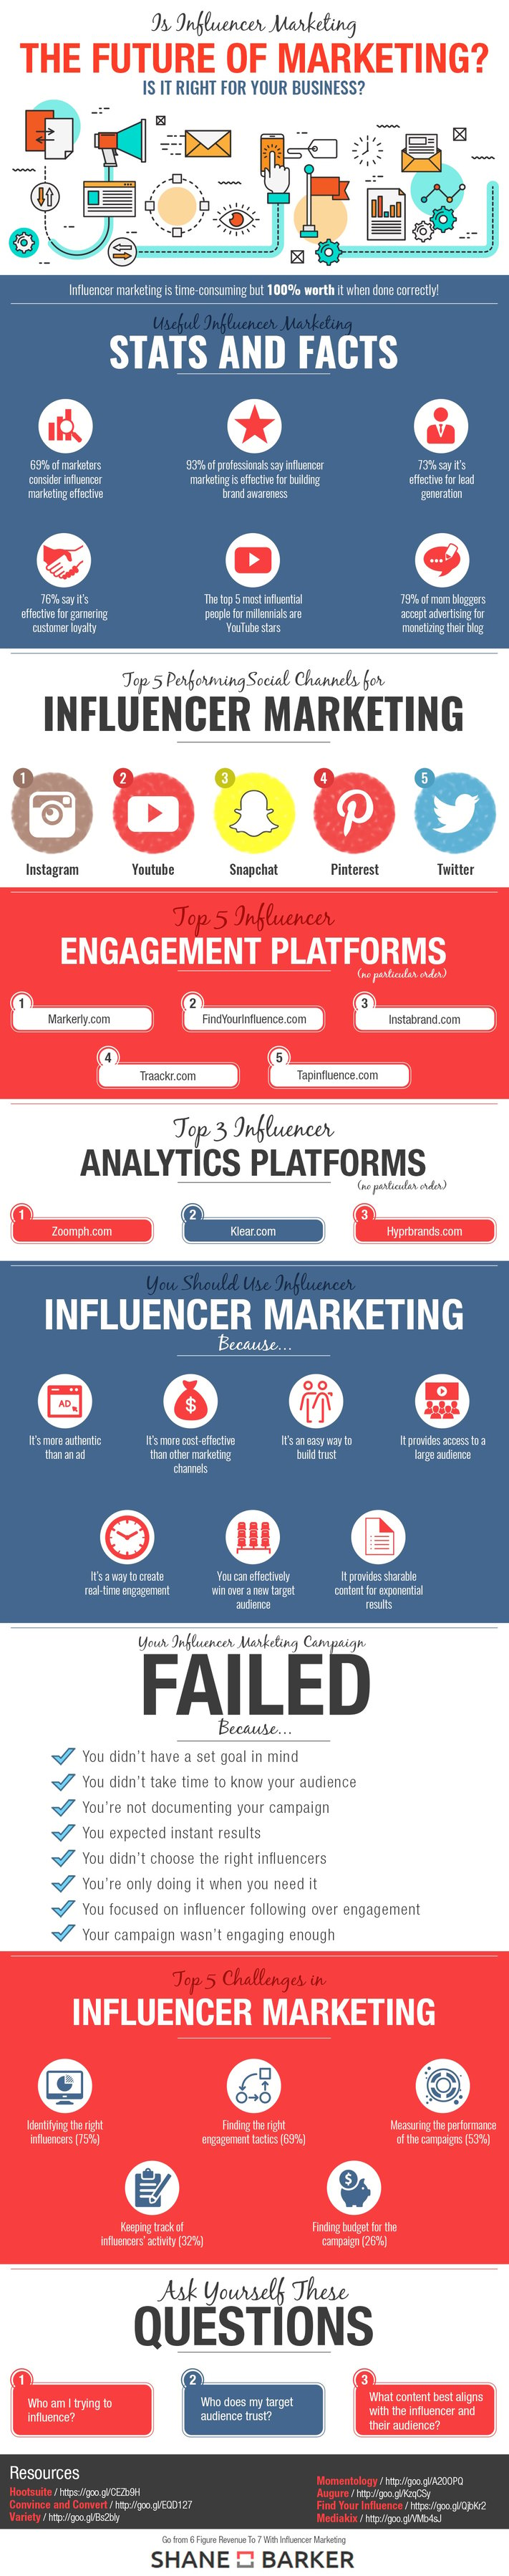 Is-Influencer-Marketing-the-Future-of-Marketing-Infographic.jpg